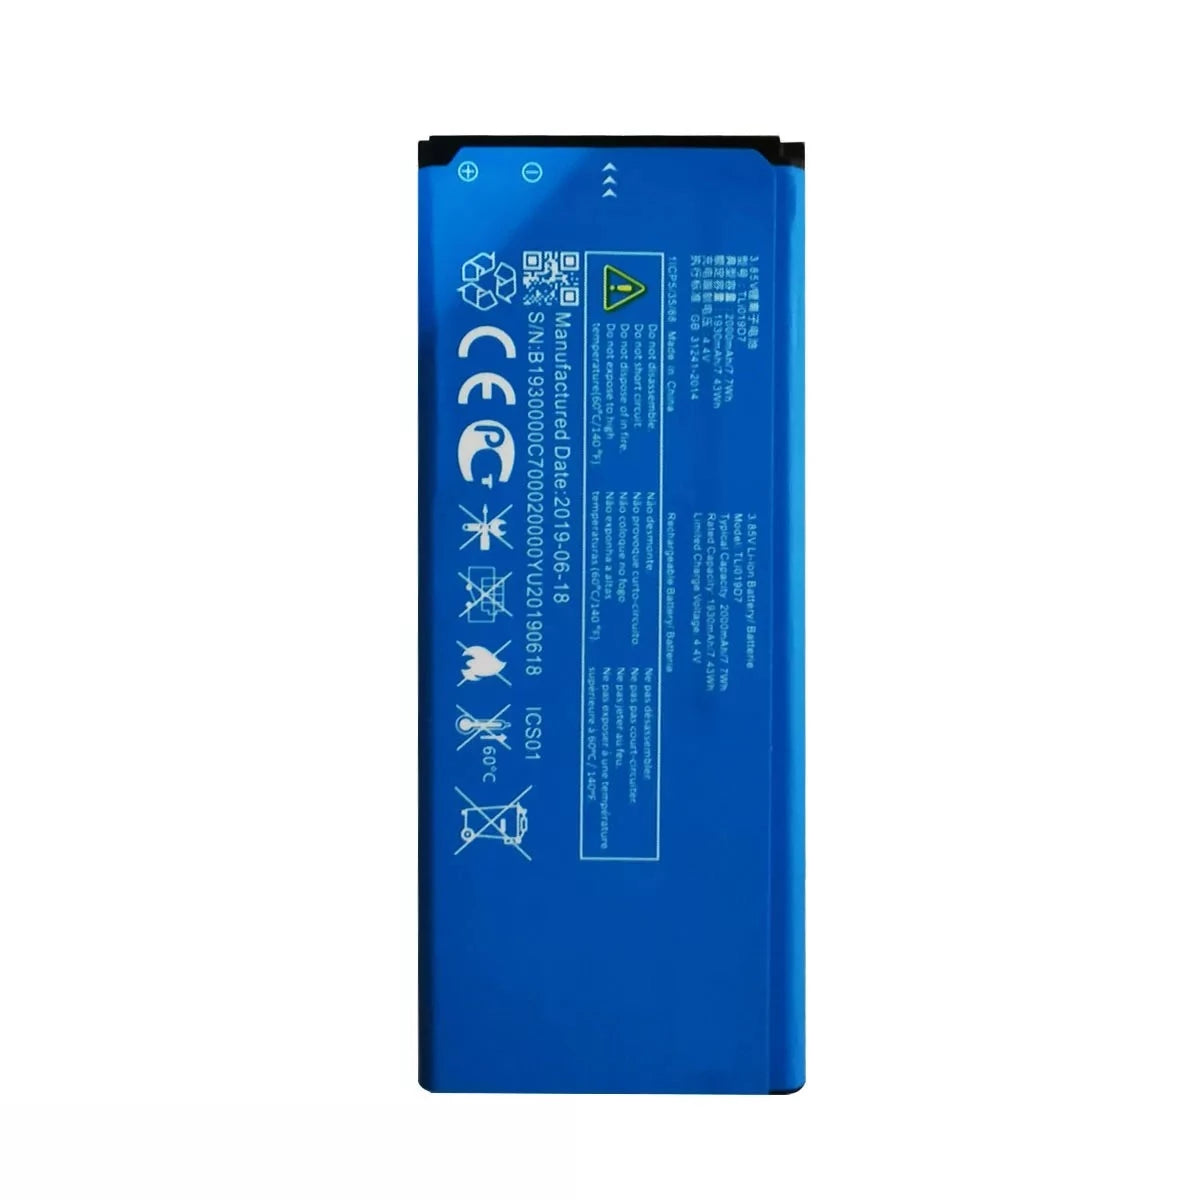 Alcatel 1 (5033 / 2018) Battery Replacement